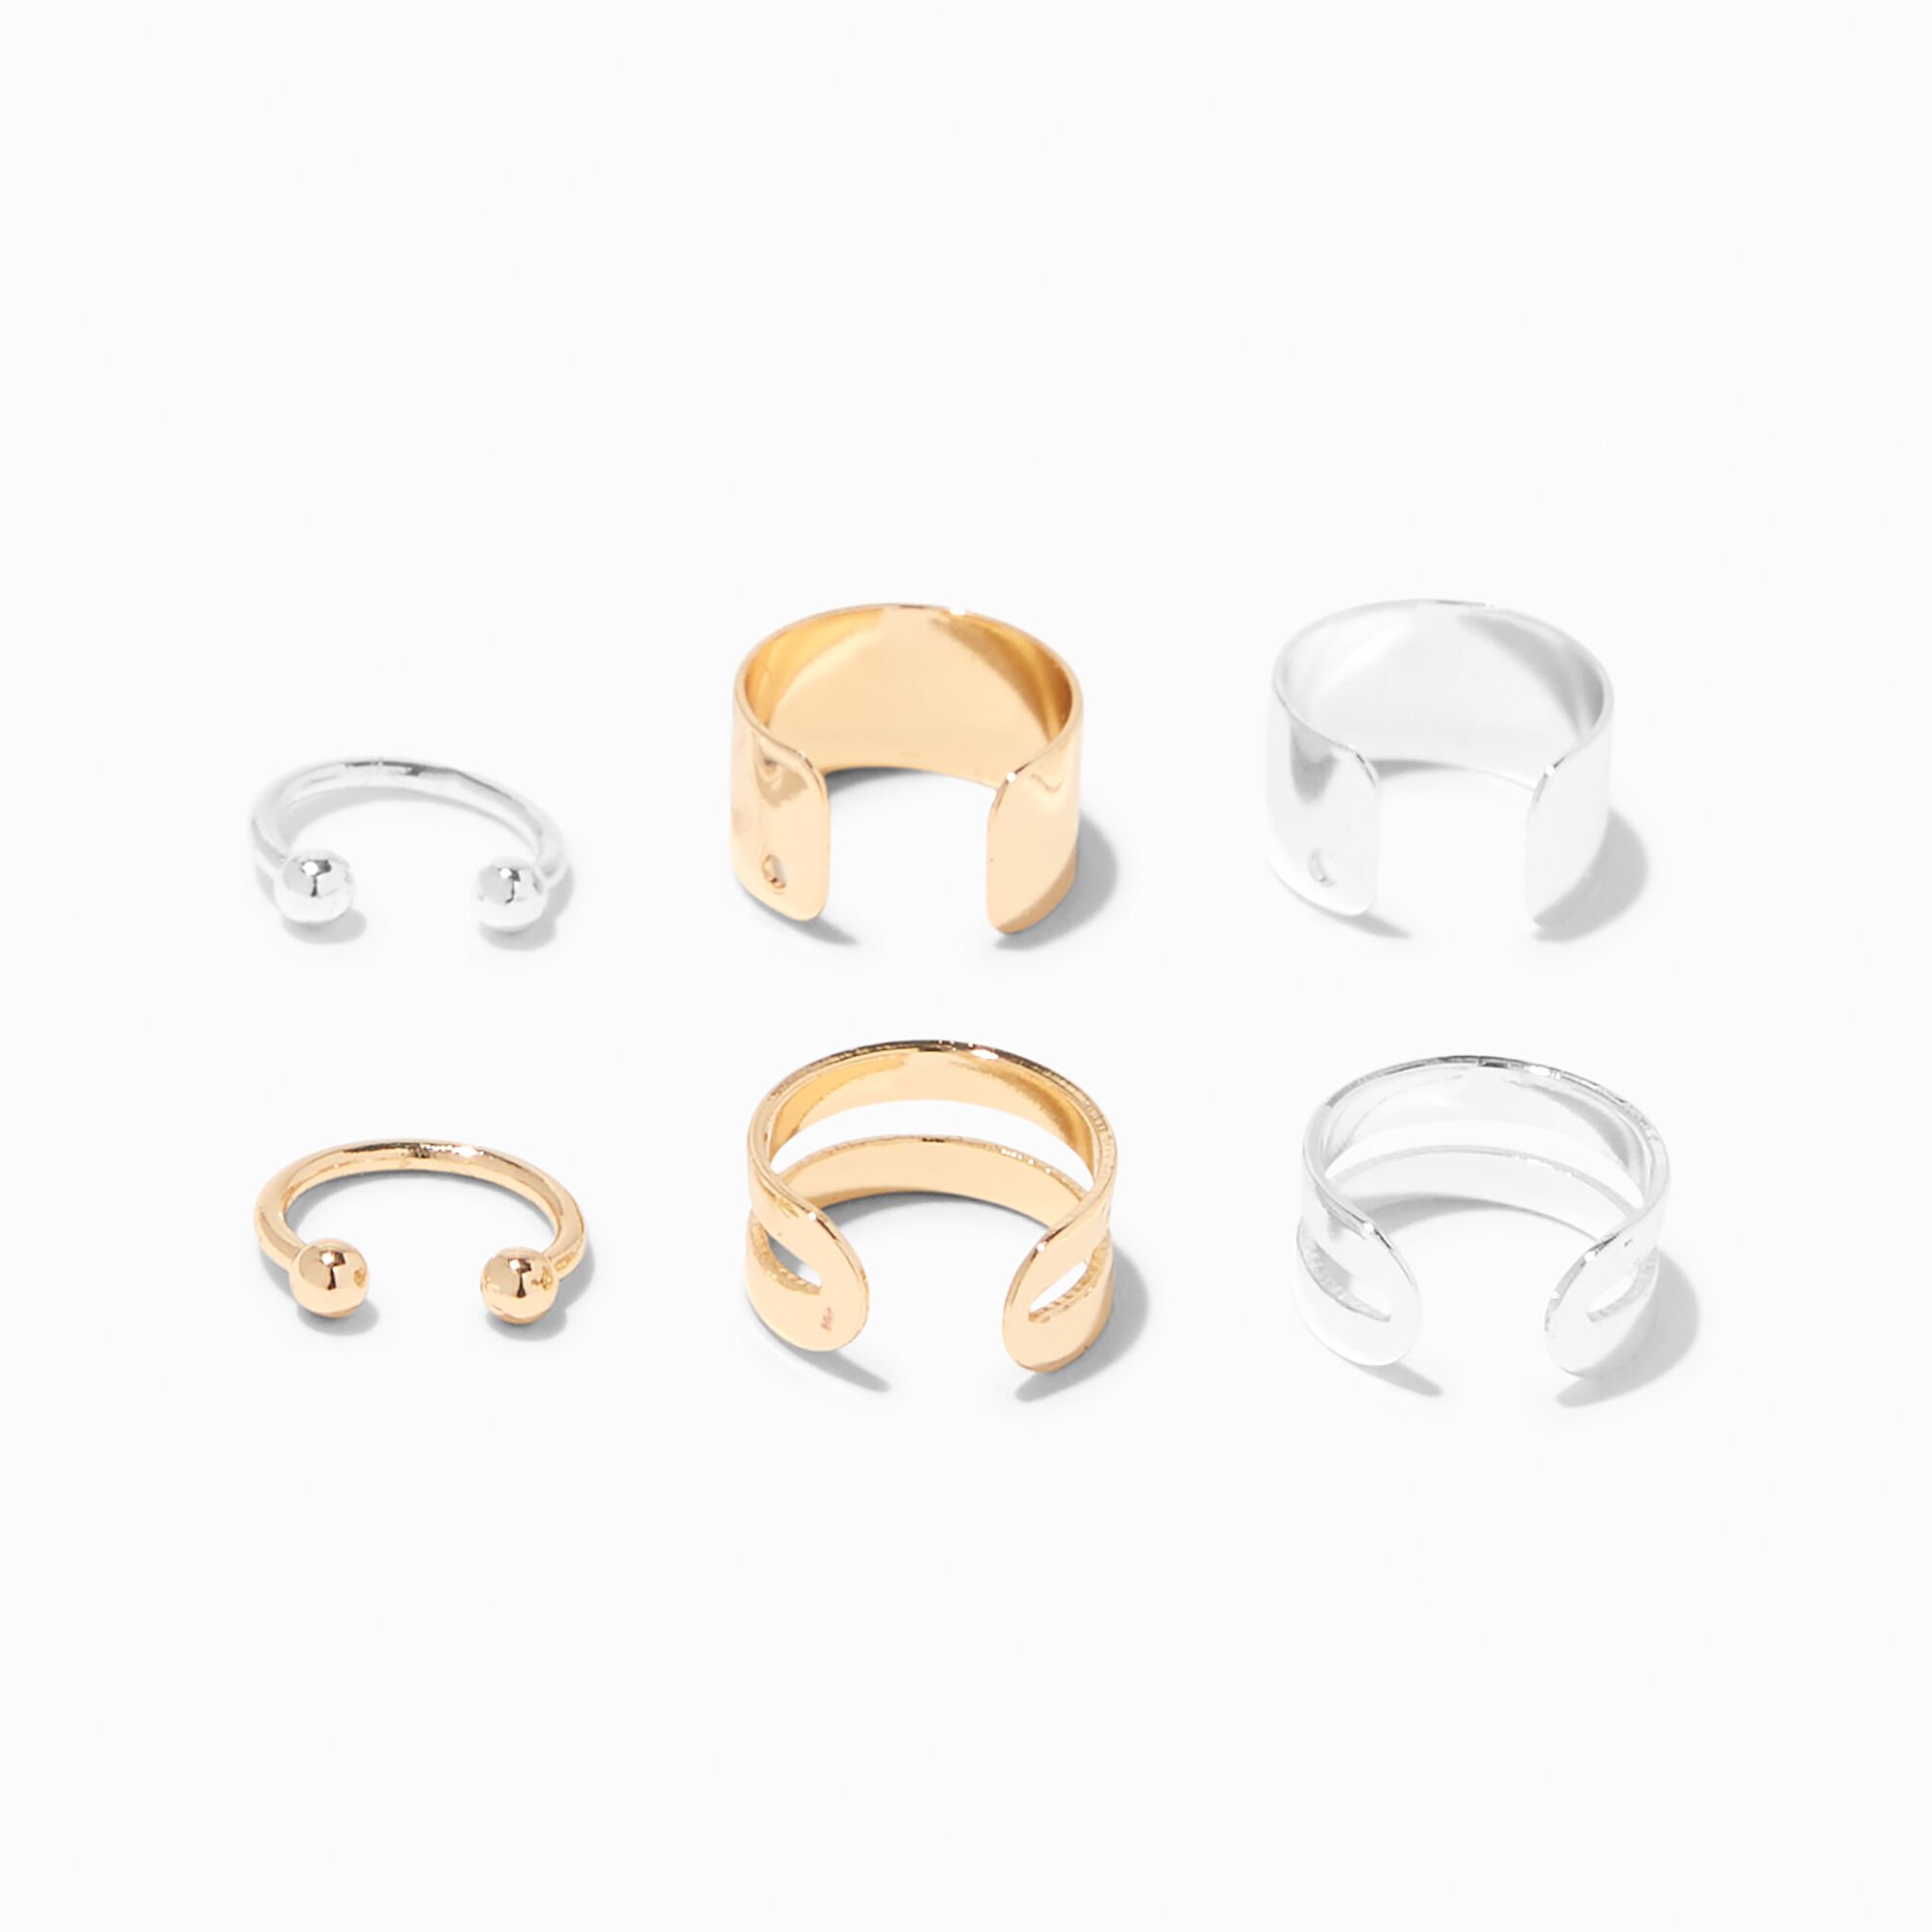 View Claires Mixed Metal Basic Ear Cuffs 6 Pack Gold information